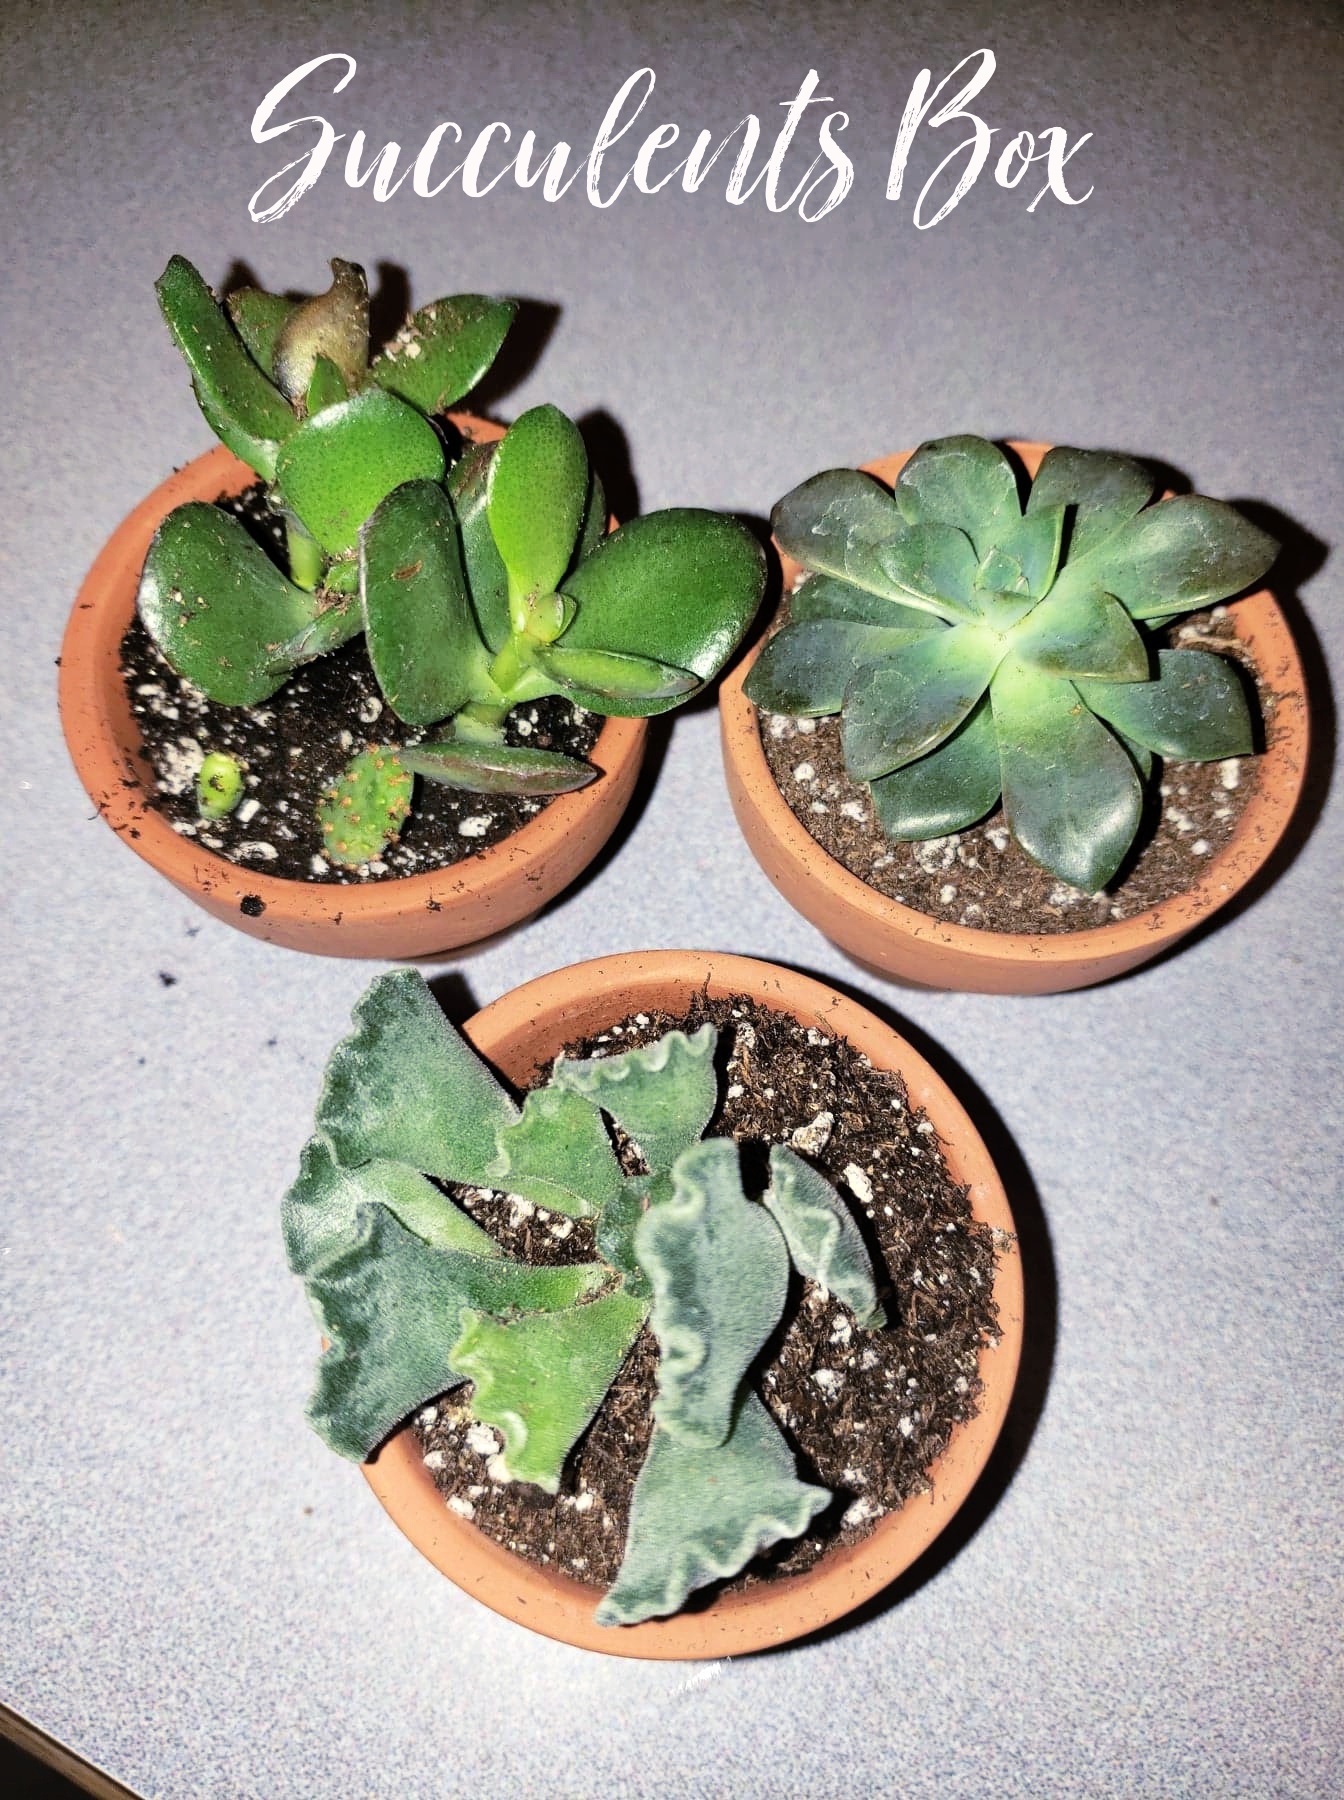 Buy Succulents Online with The Succulents Subscription Box!